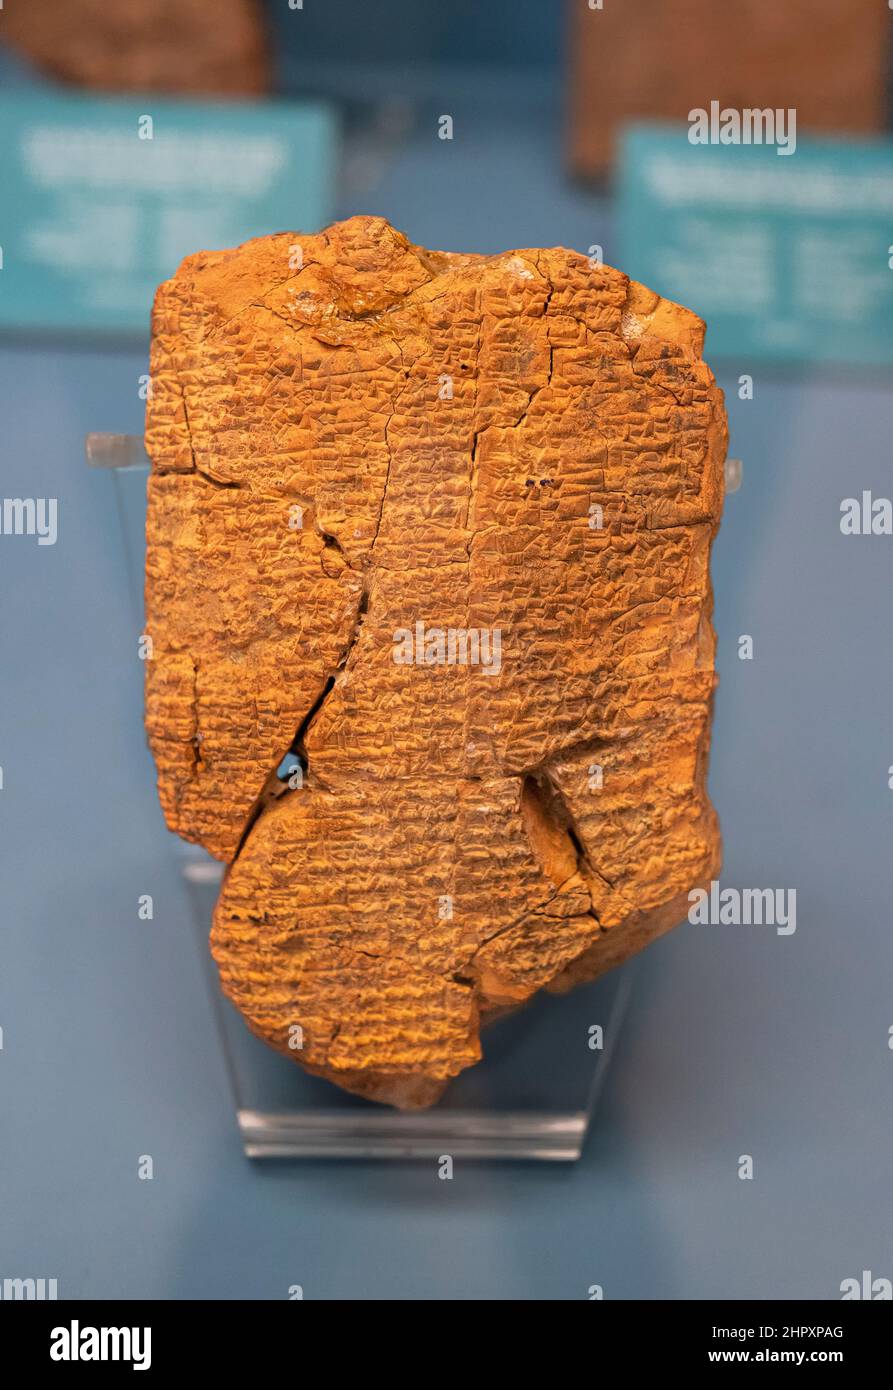 Sumerian cuneiform tablet from Nippur (Ancient Sumerian city). 1st half of the 2nd millennium BCE. Istanbul Archaeology Museum. Stock Photo